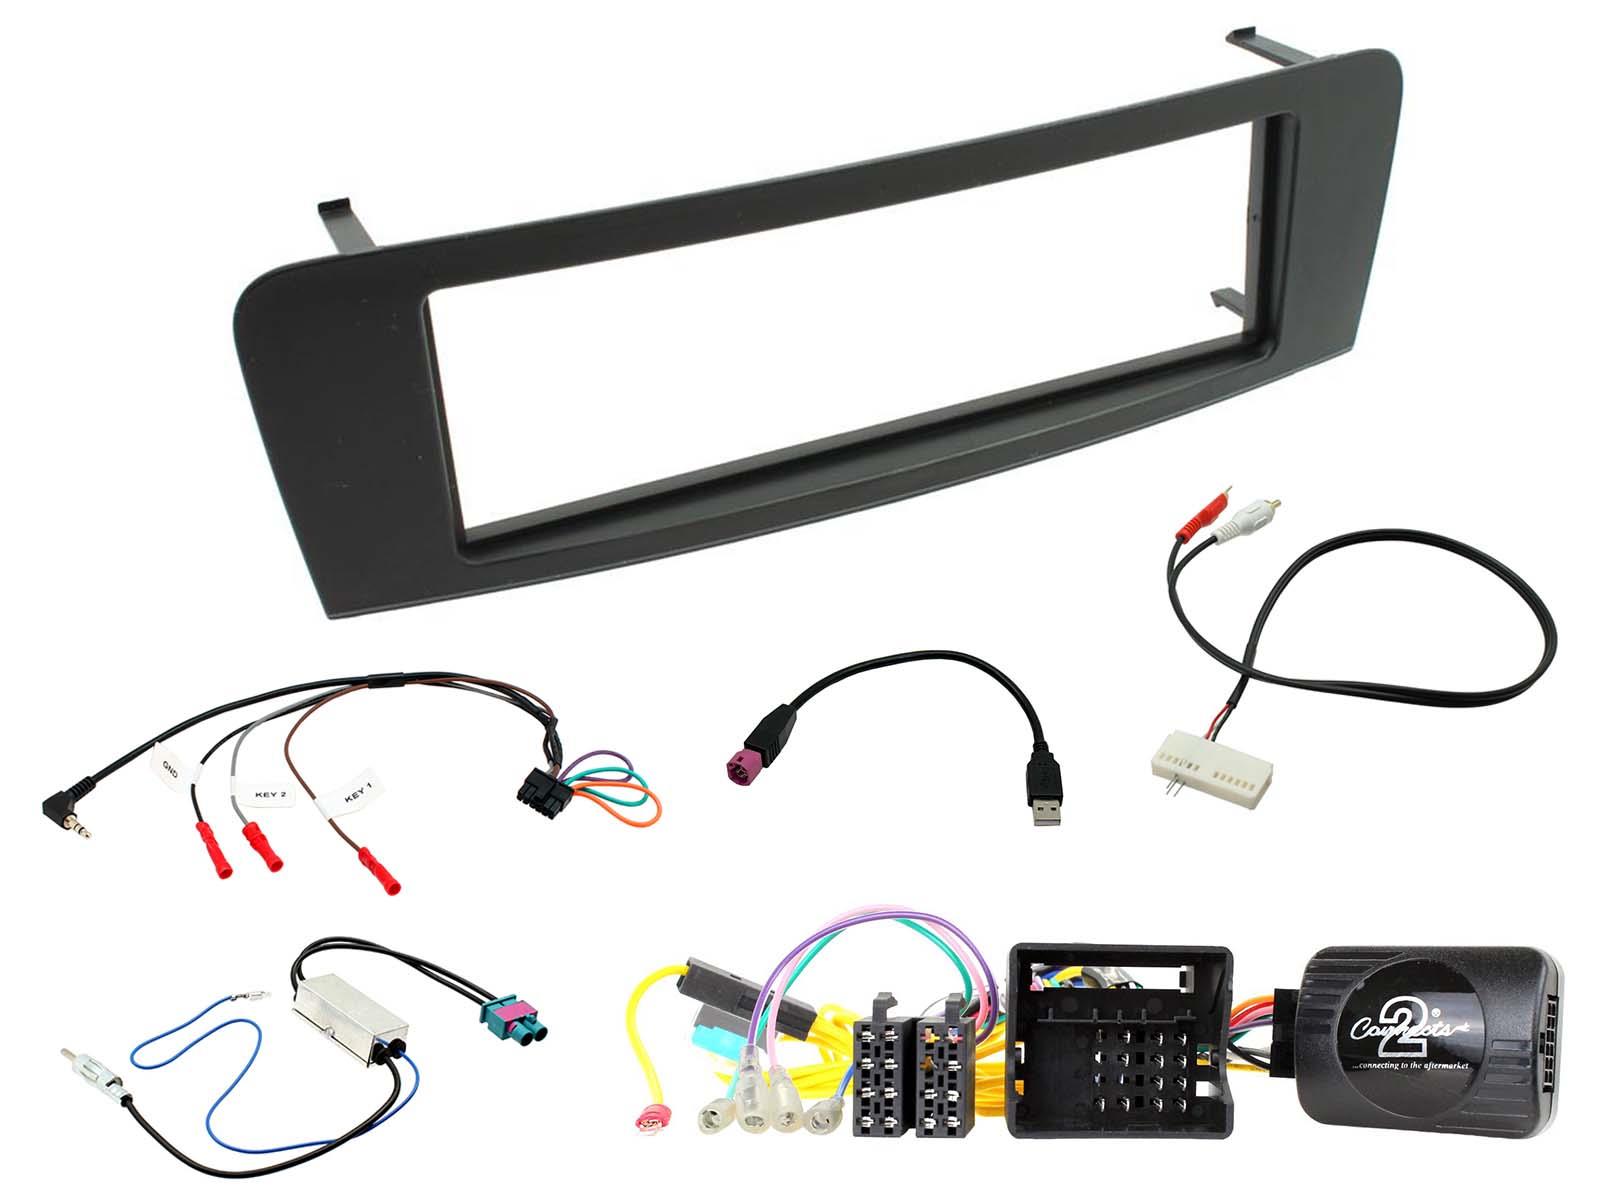 CONNECTS2 MERCEDES CLK 06 DOUBLE DIN STEREO FACIA KIT 